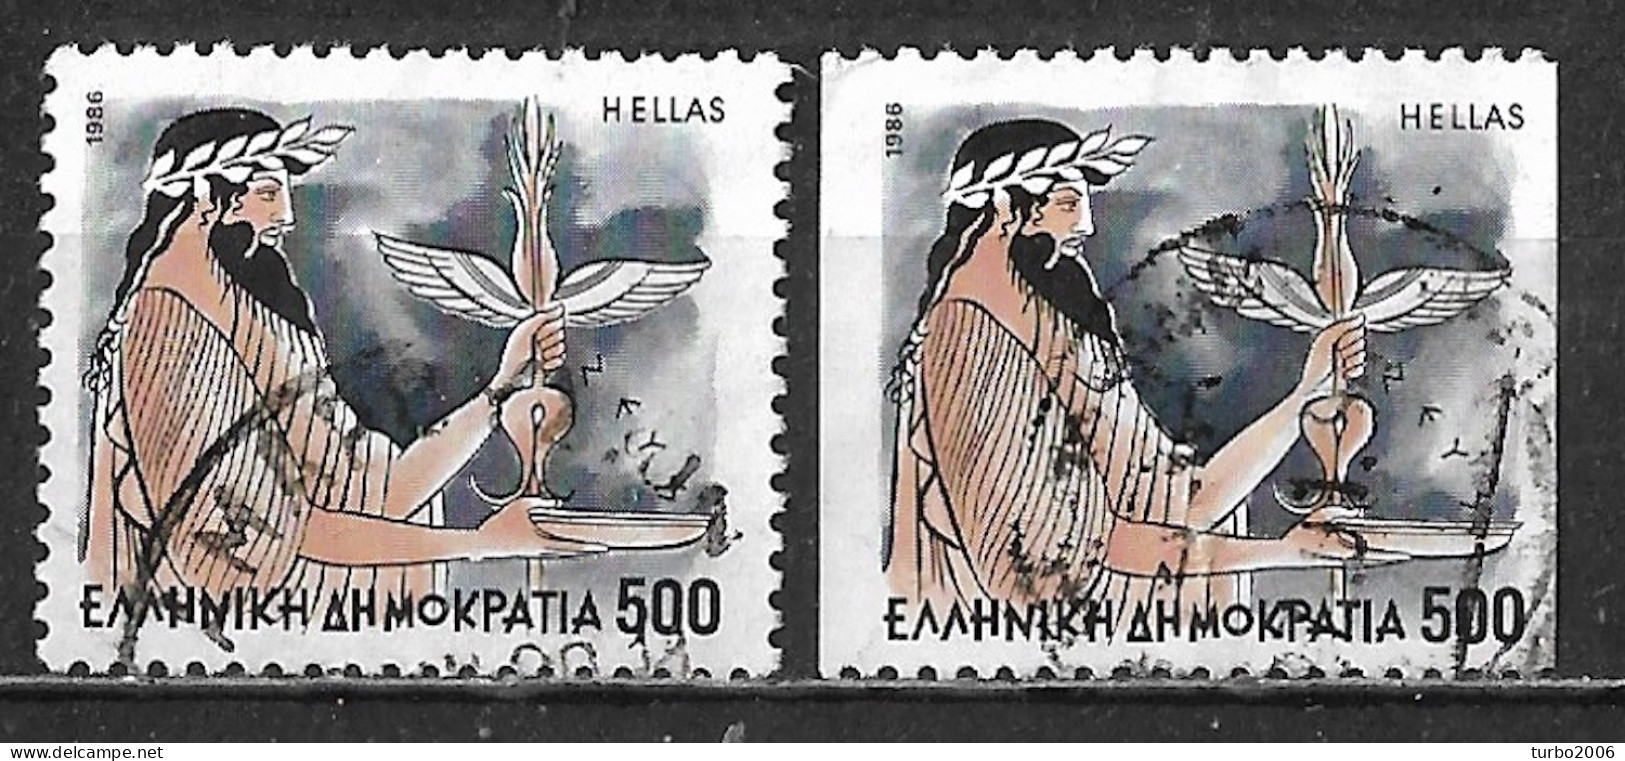 GREECE 1986 Olympian Gods 500 Dr. 4 And 2 Sides Perforated Both Key Values Used Vl. 1679 + 1679 A - Used Stamps